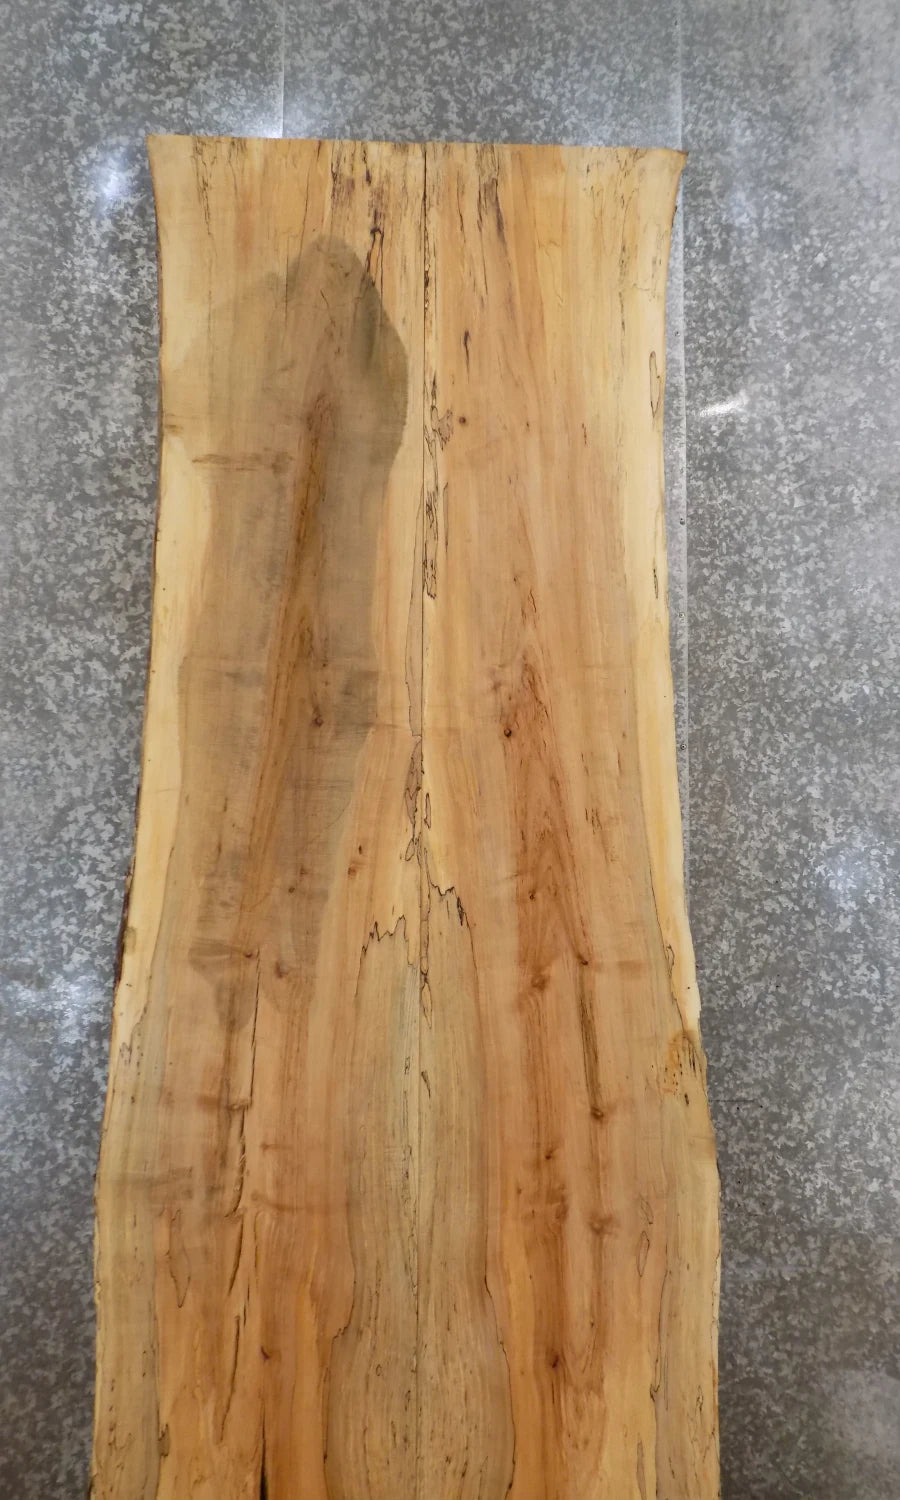 2- Live Edge Bookmatched Spalted Maple Conference Table Top Slabs 20433-20434